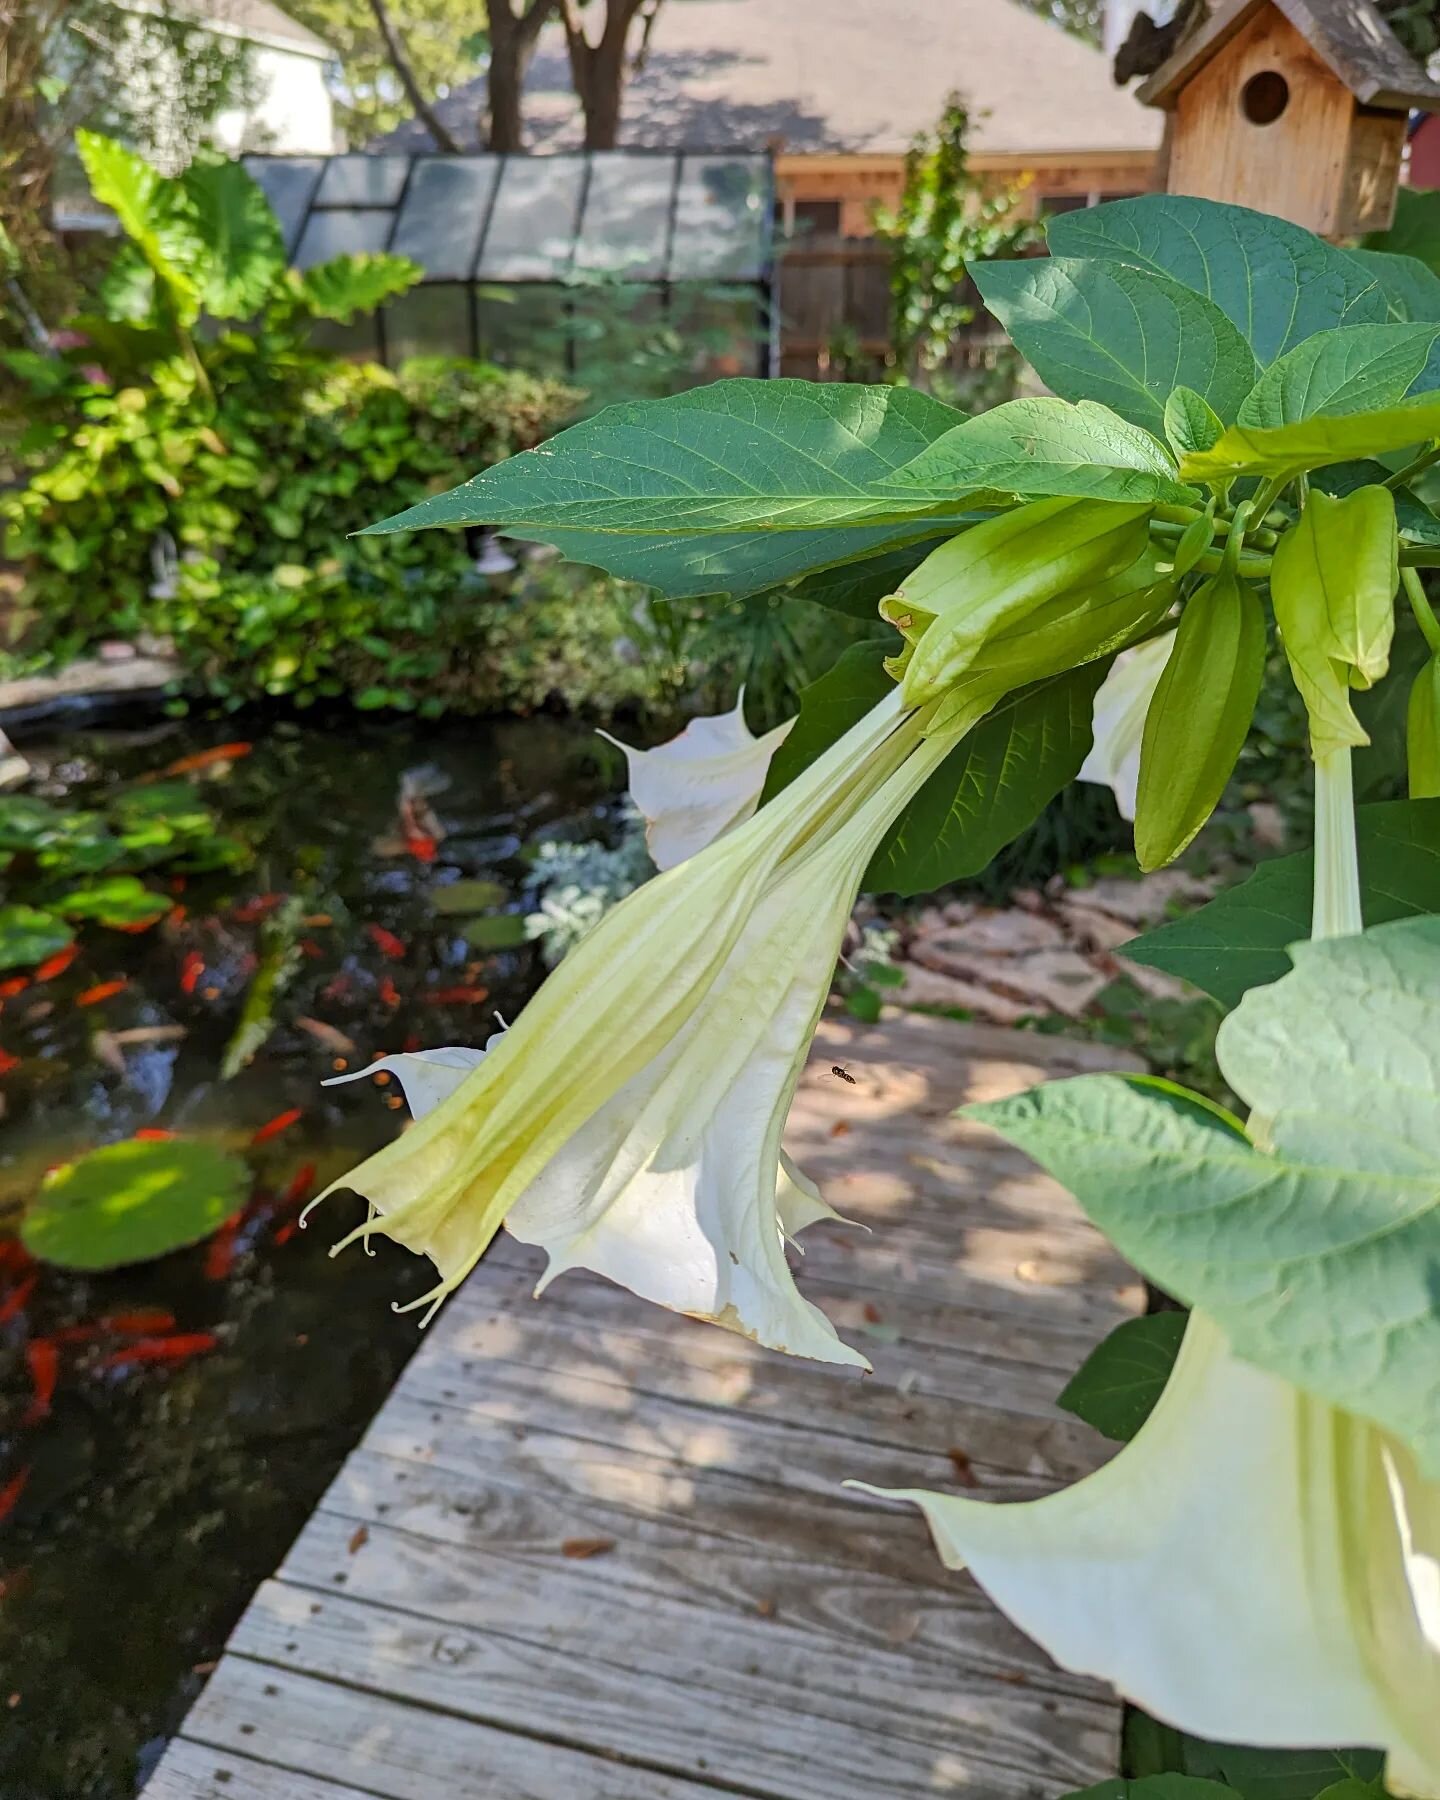 The Brugmansia is blooming and it smells wonderful outside.